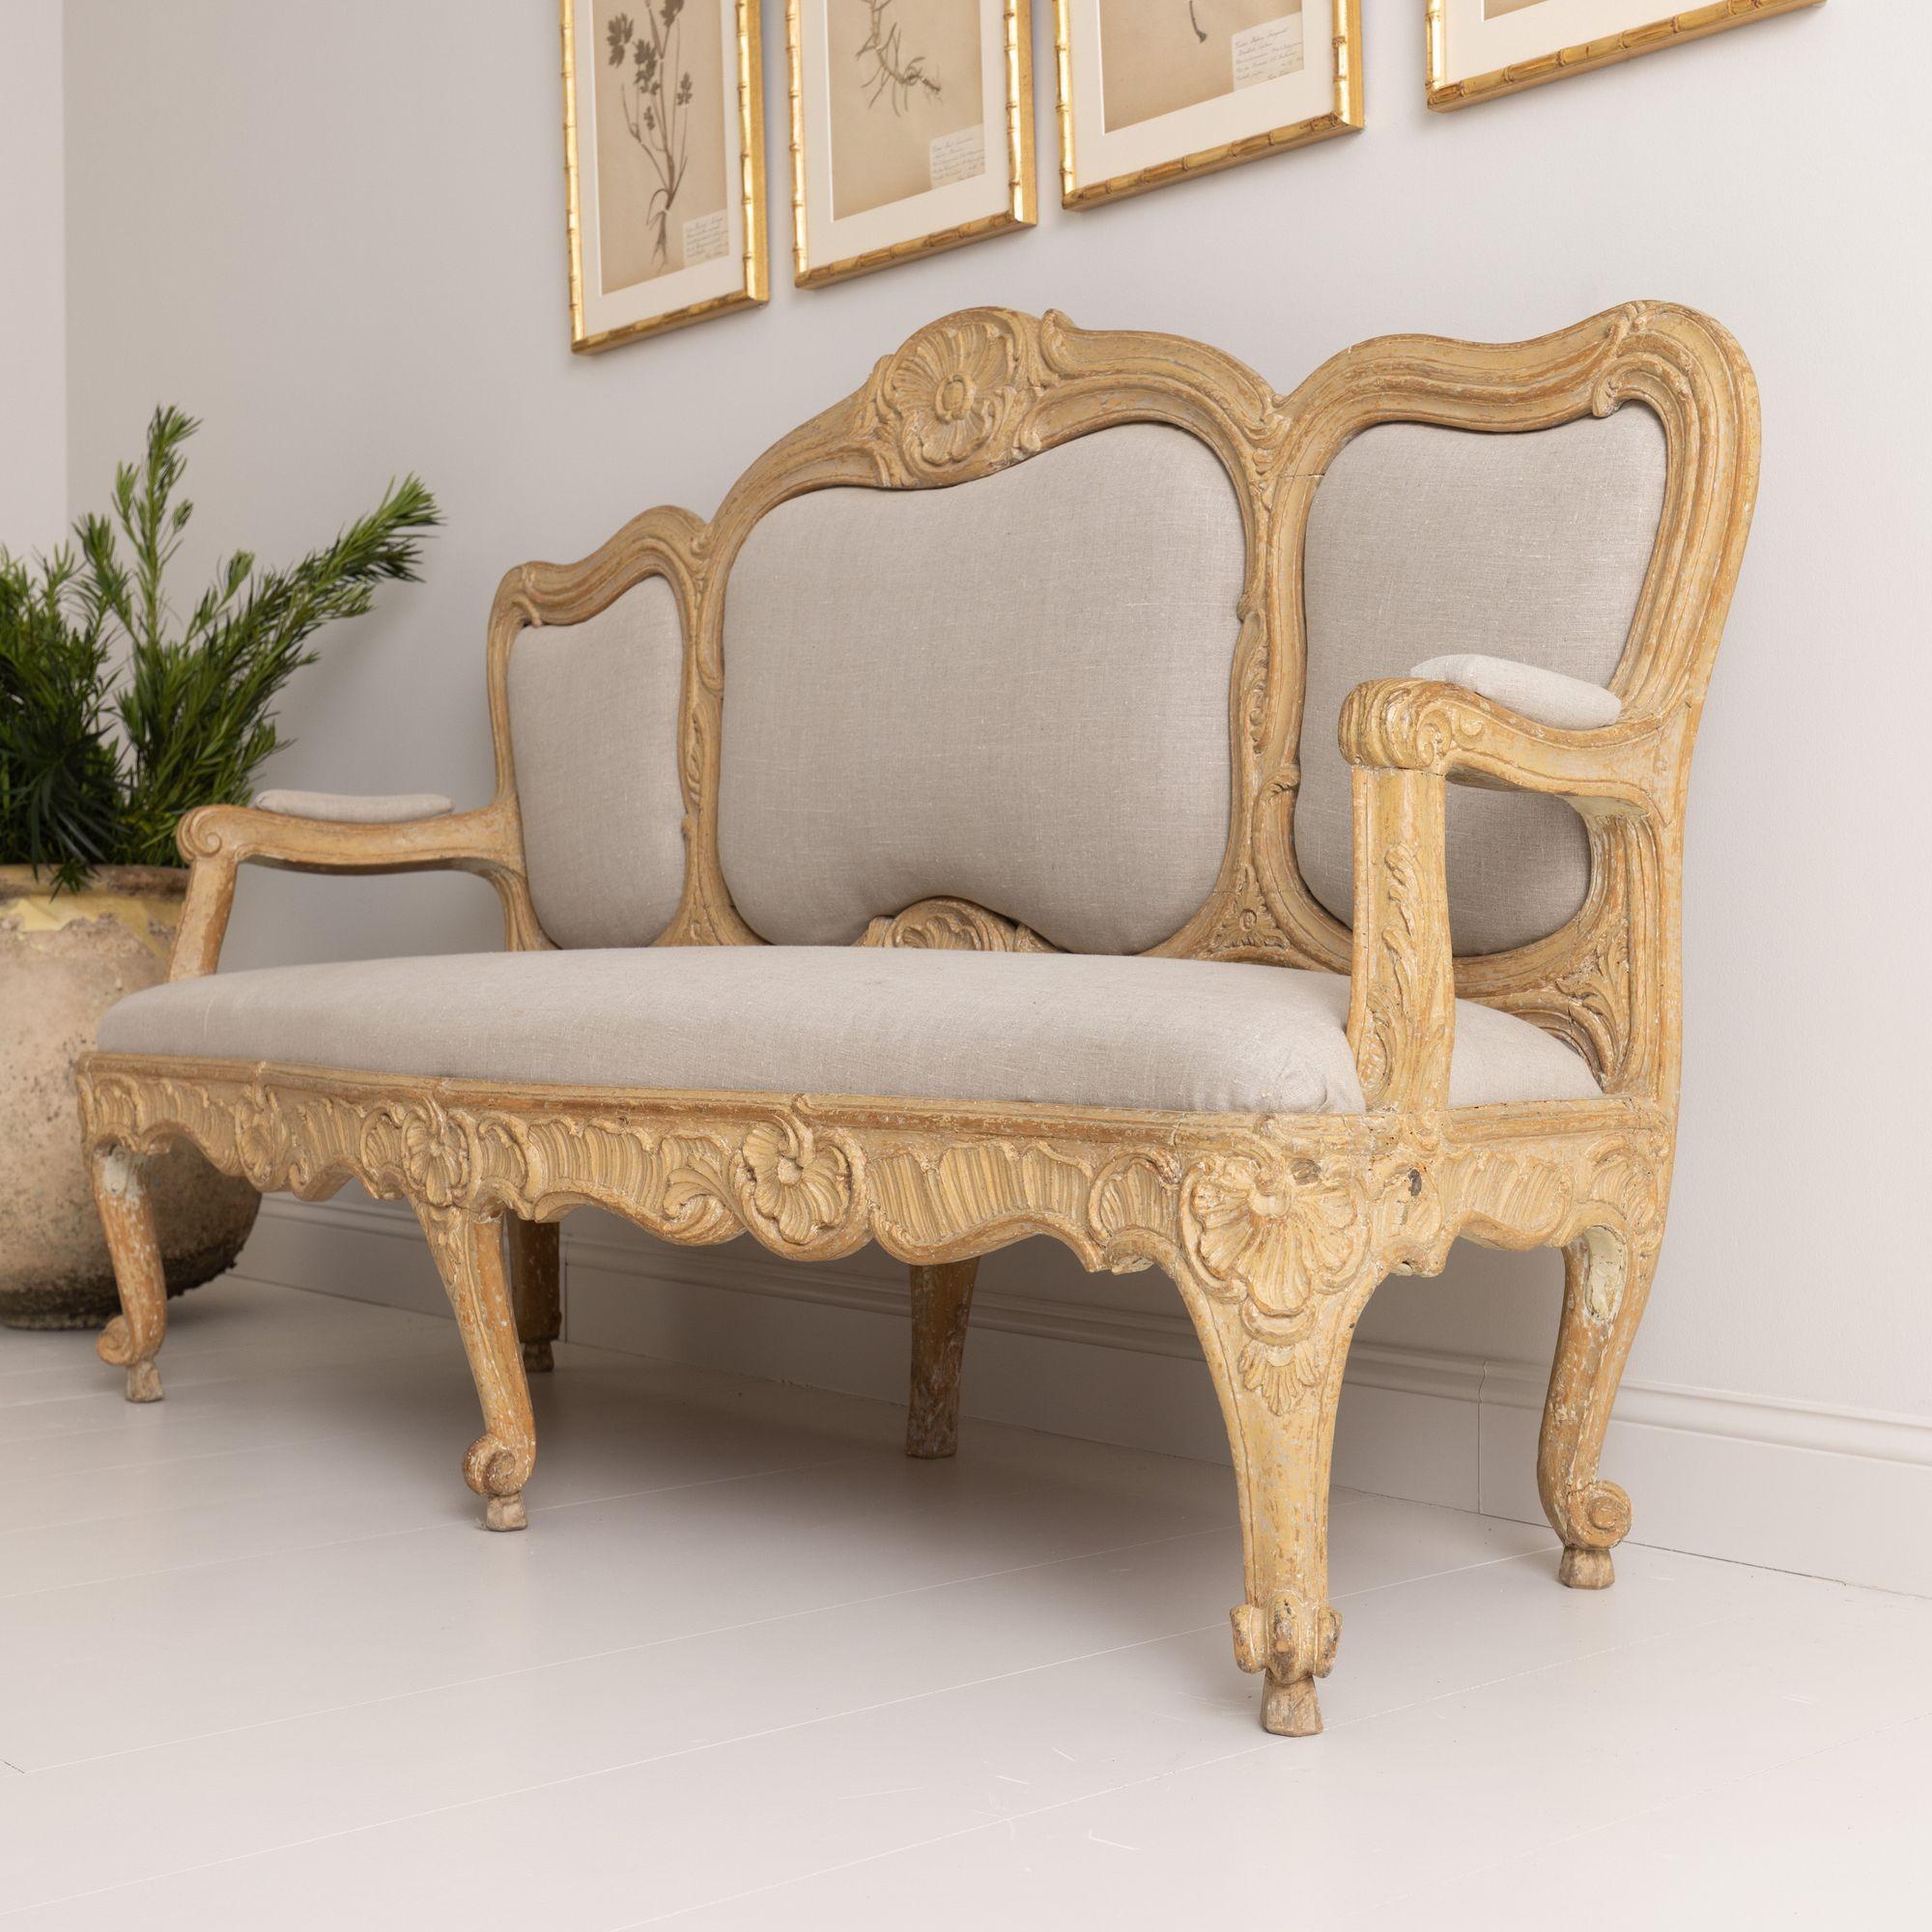 18th Century and Earlier 18th C. Swedish Rococo Sofa Bench in Original Paint from Stockholm